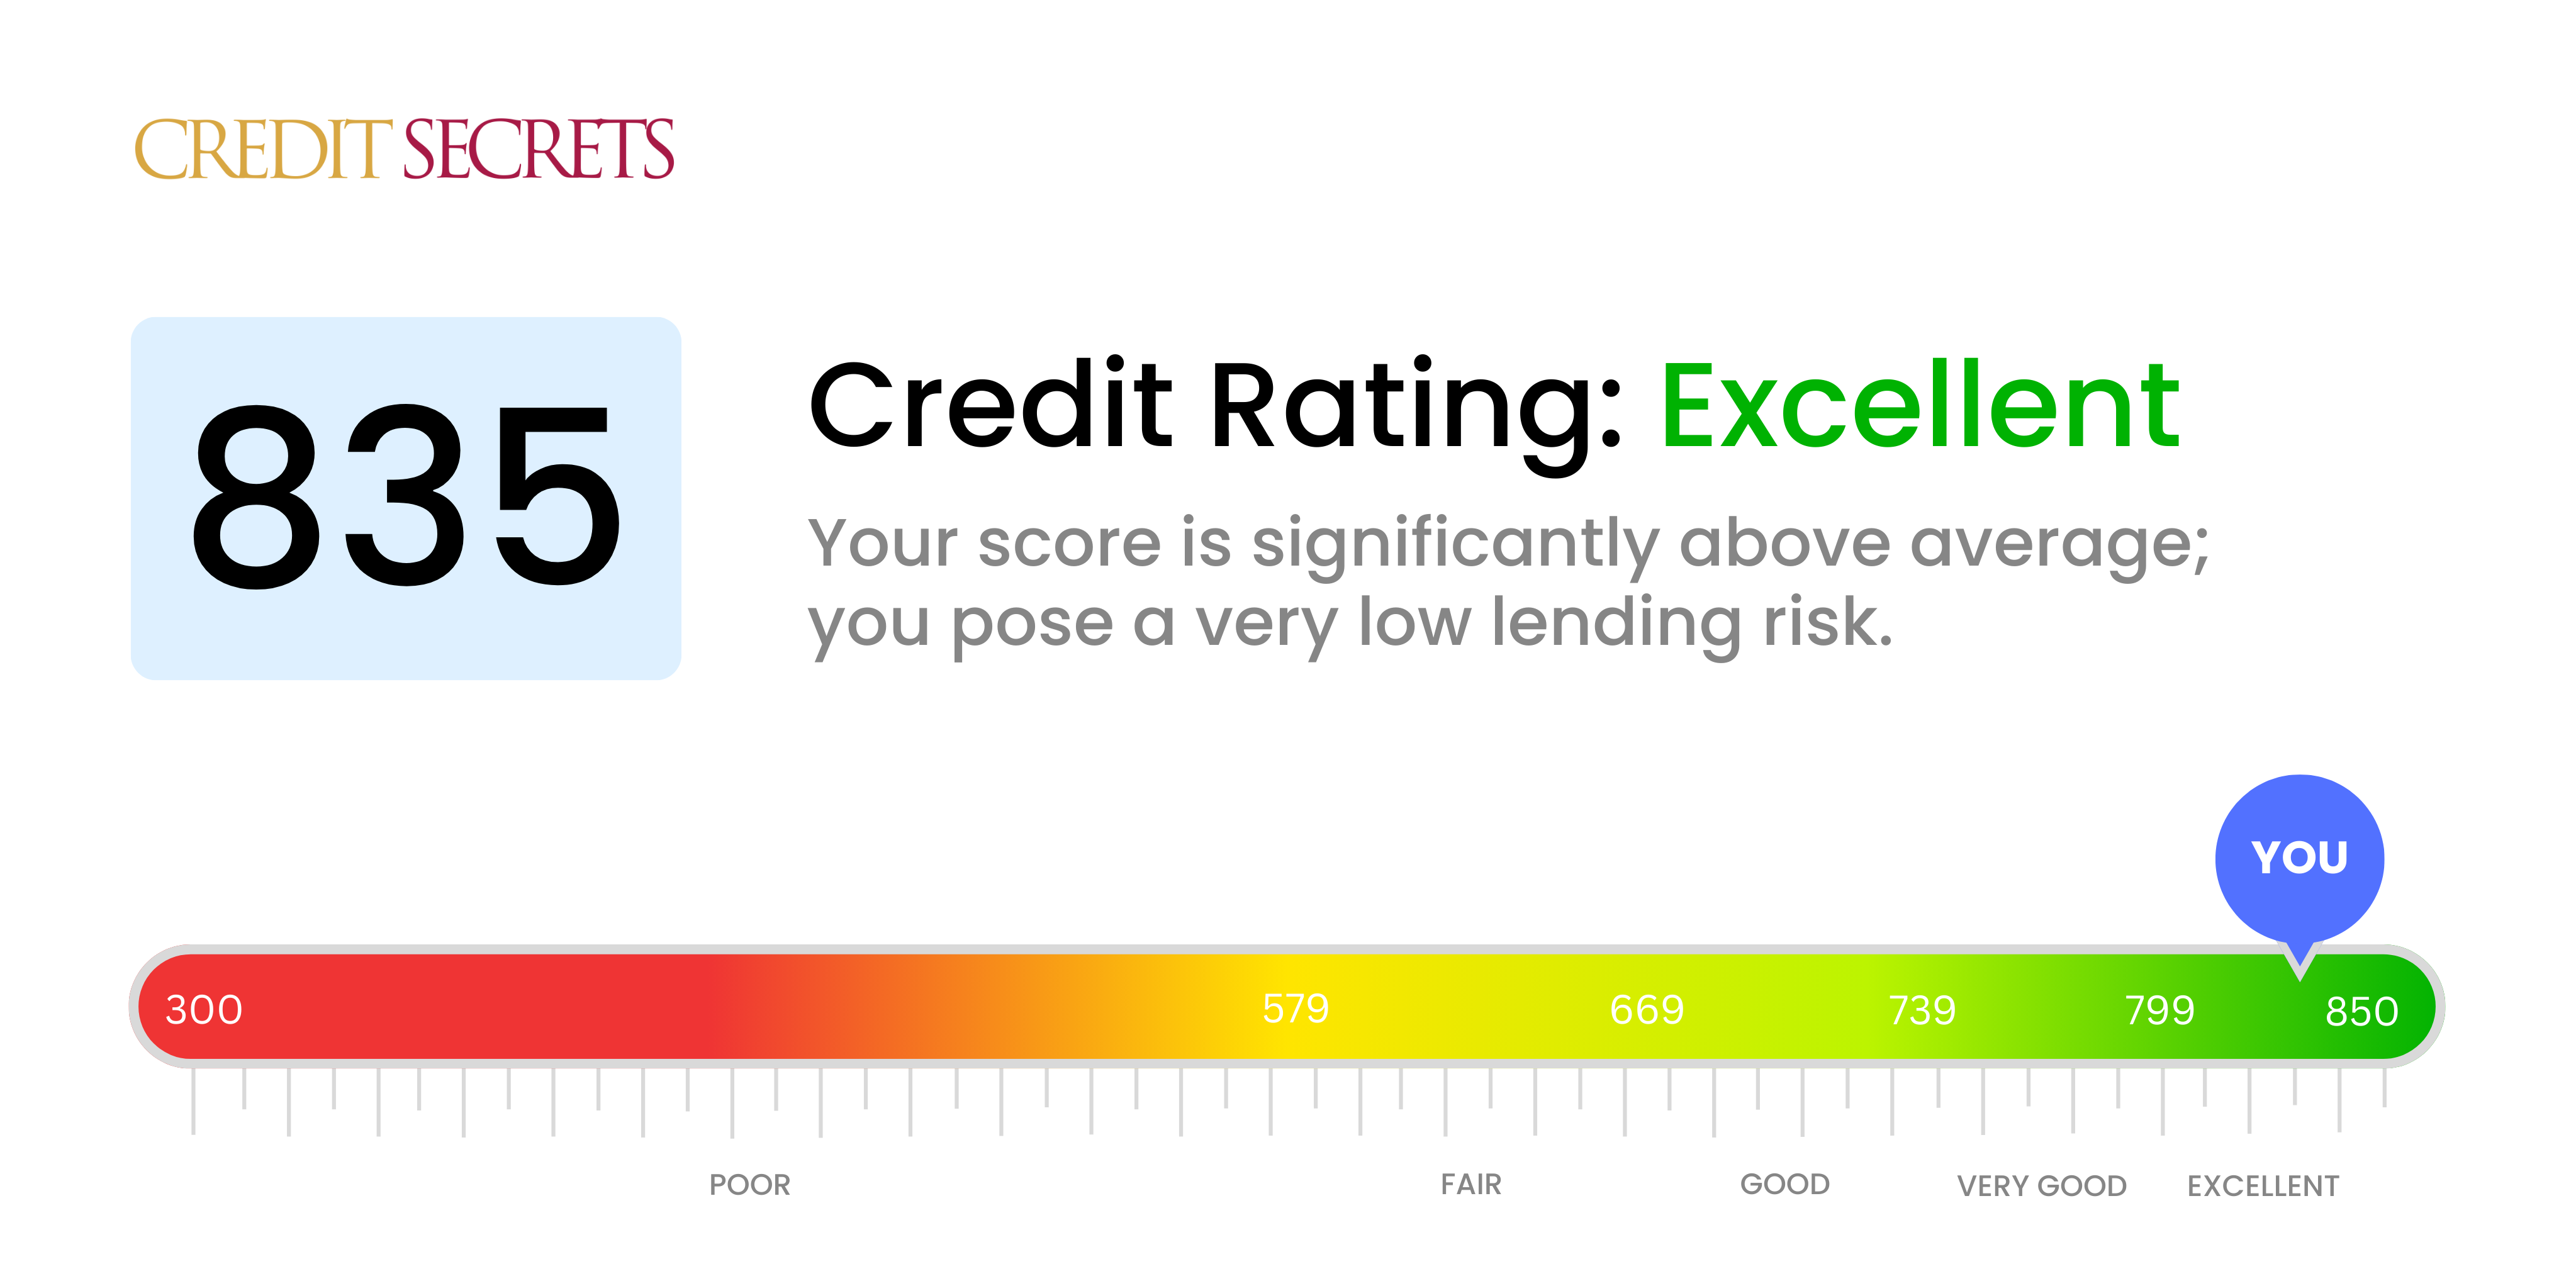 Is 835 a good credit score?